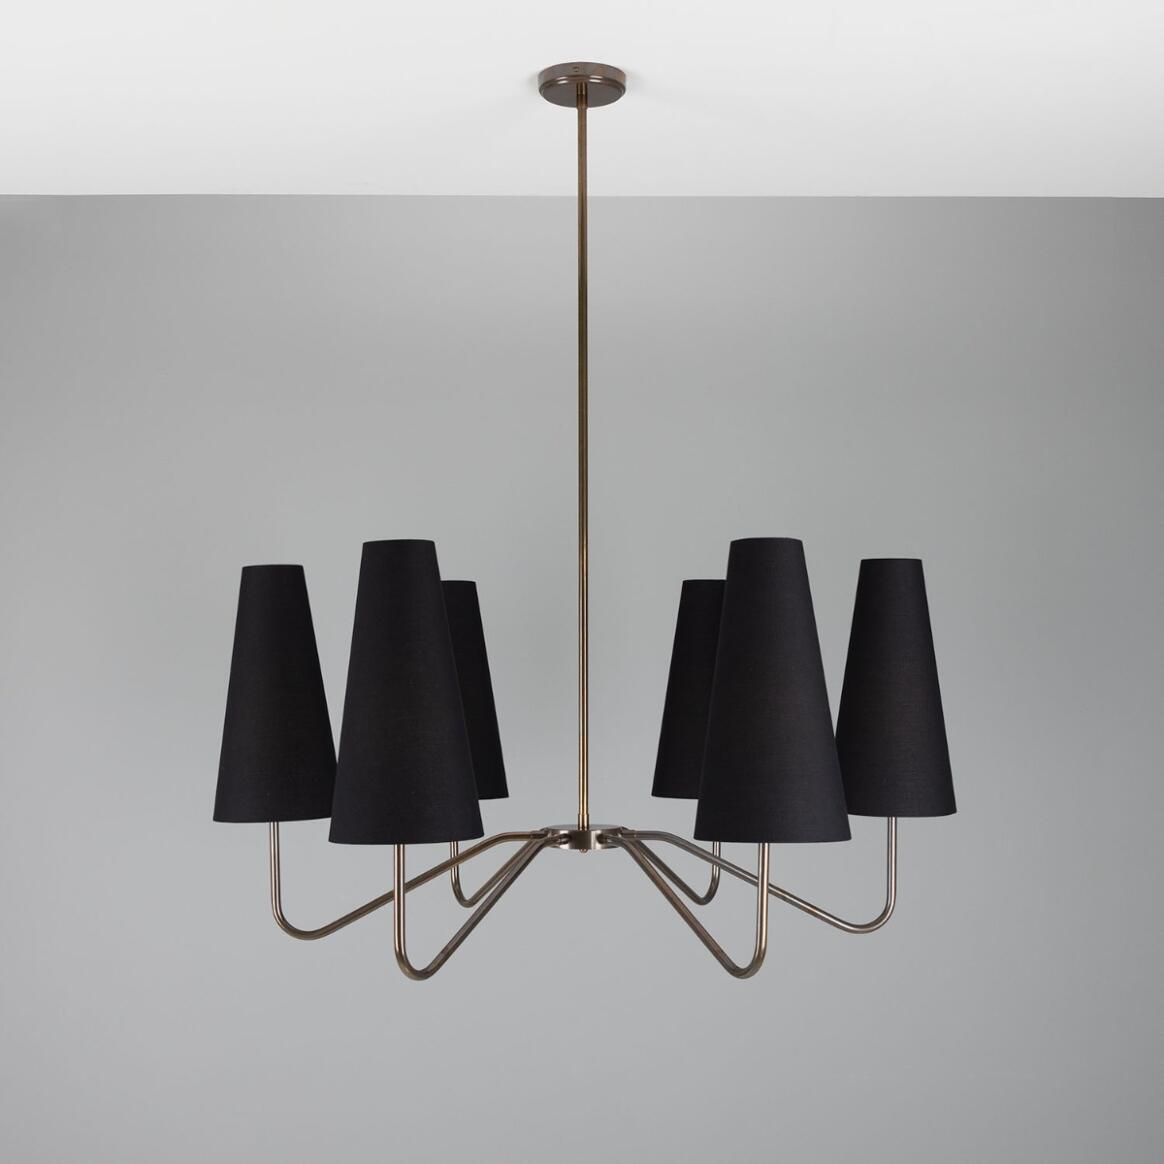 Para Modern Brass Chandelier with Fabric Shades, Six-Arm main product image